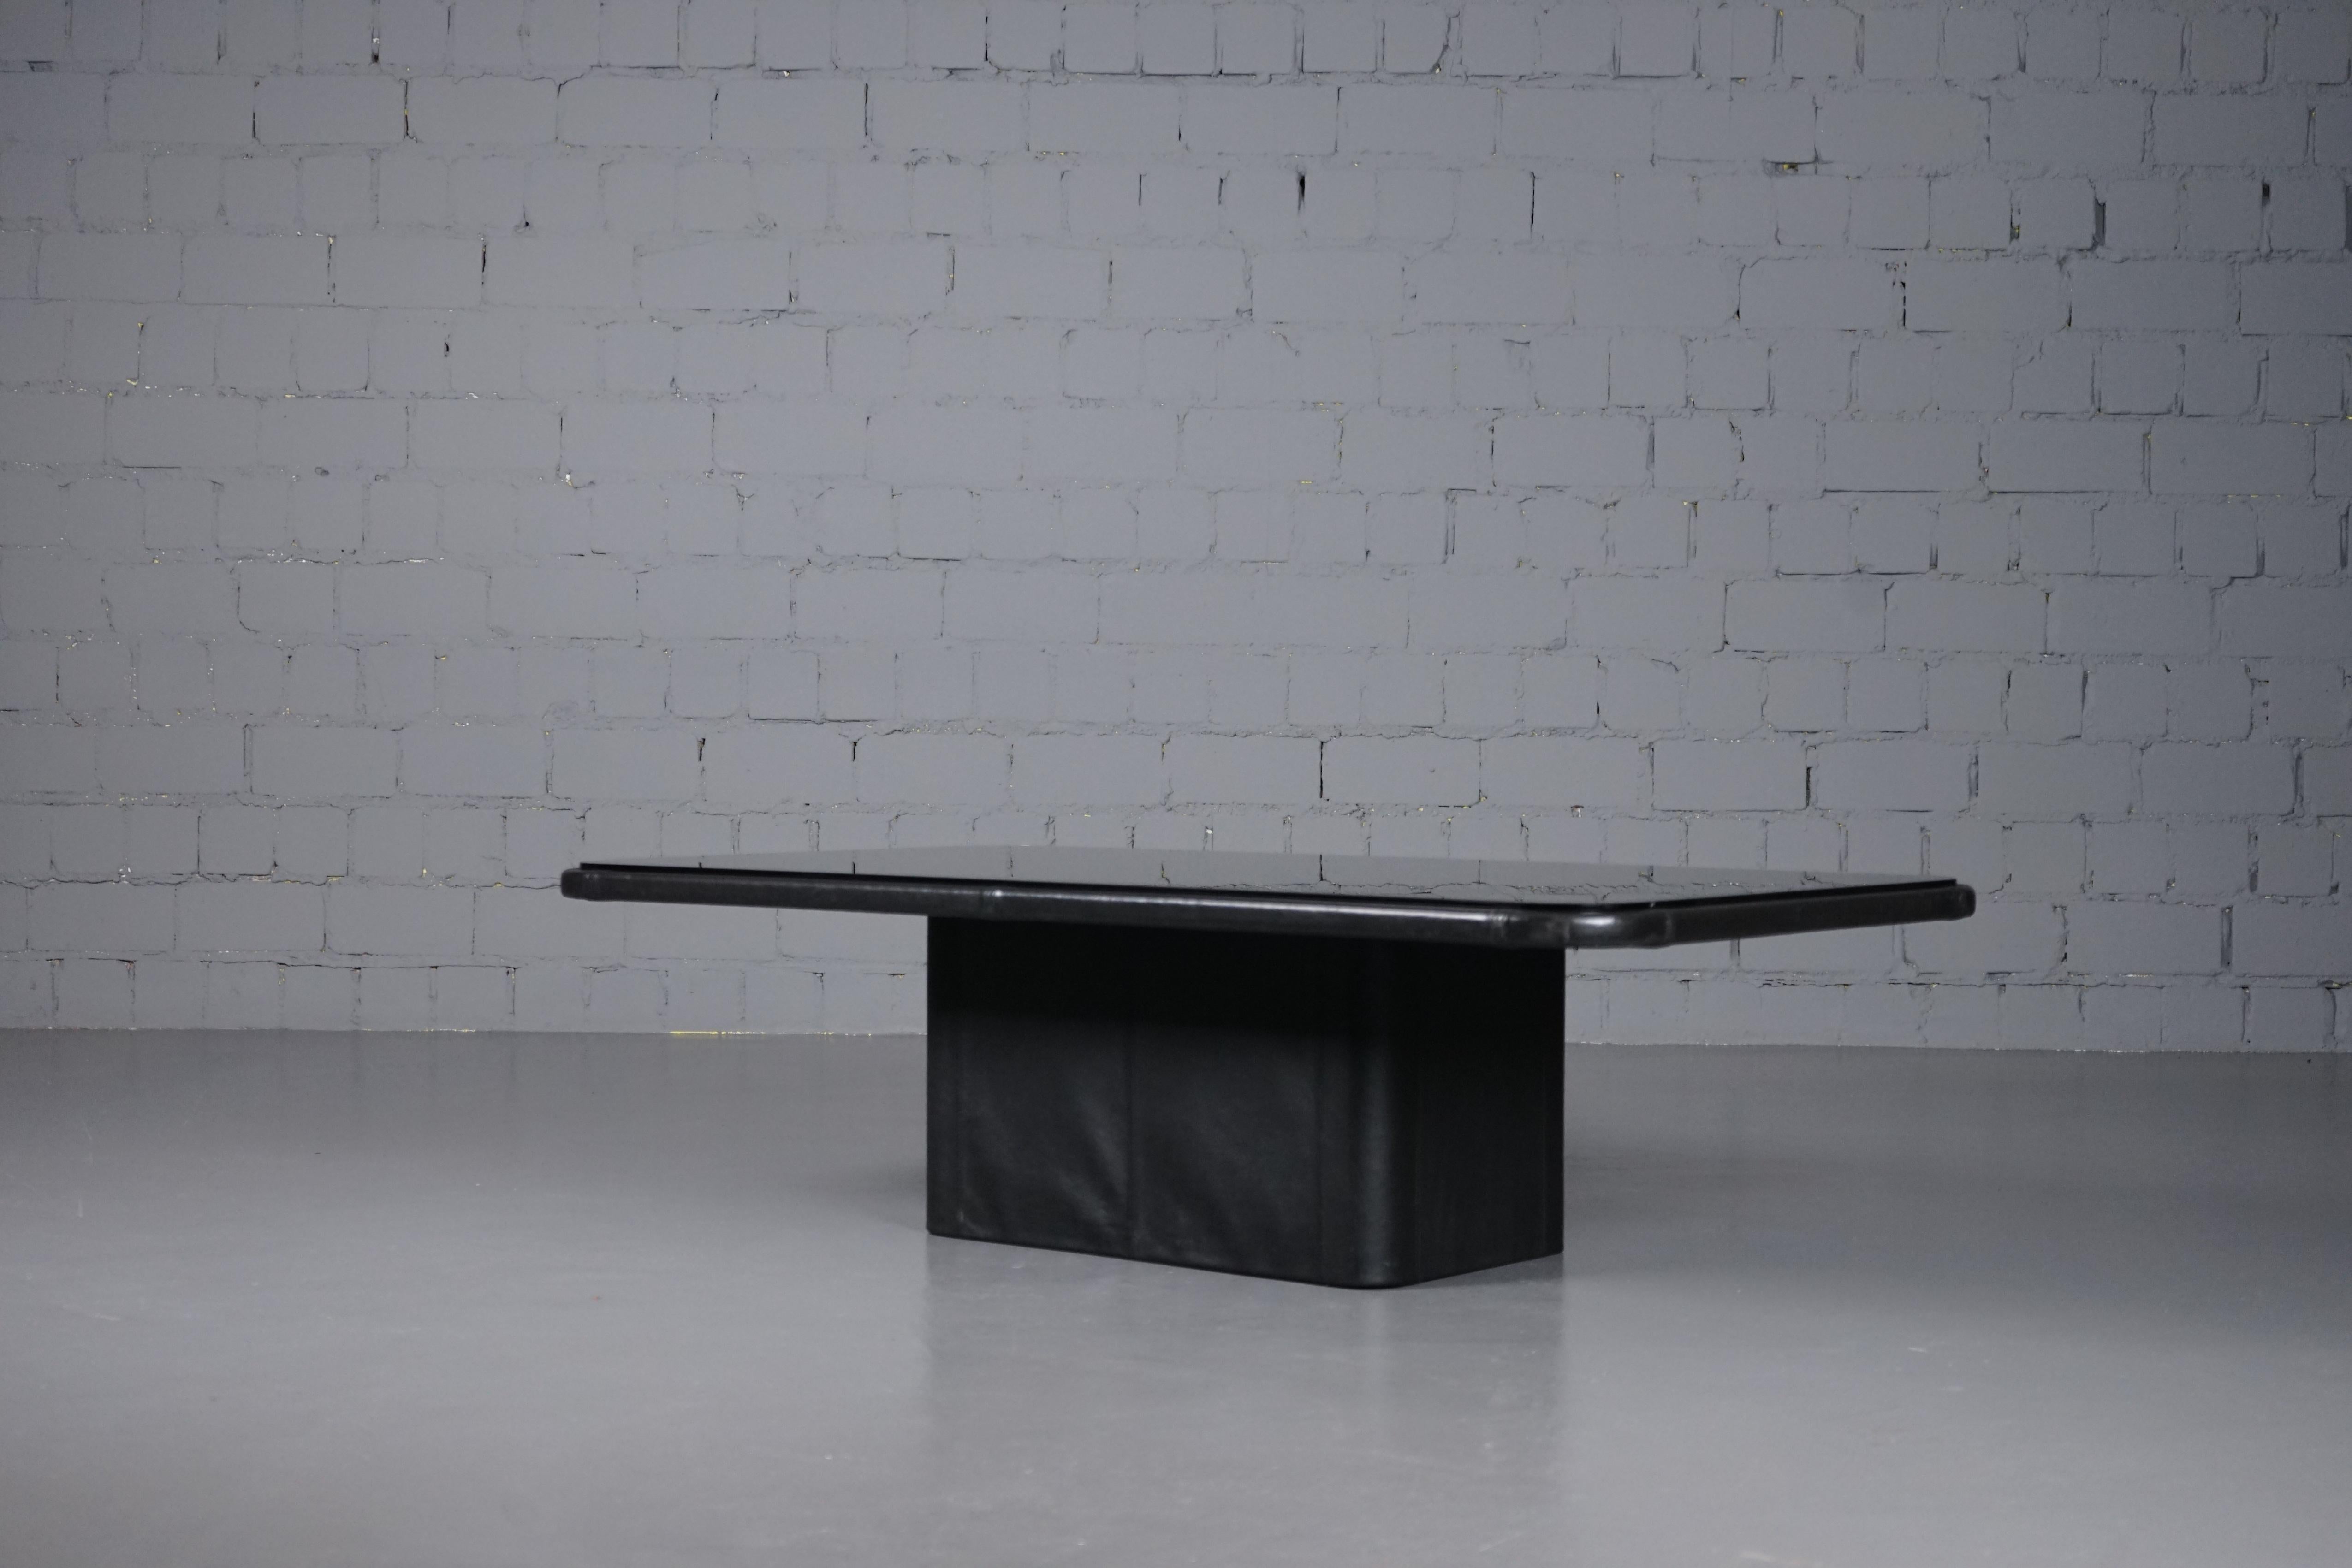 A classic coffee table with mirror glass & black leather from De Sede designed in the 1970s.